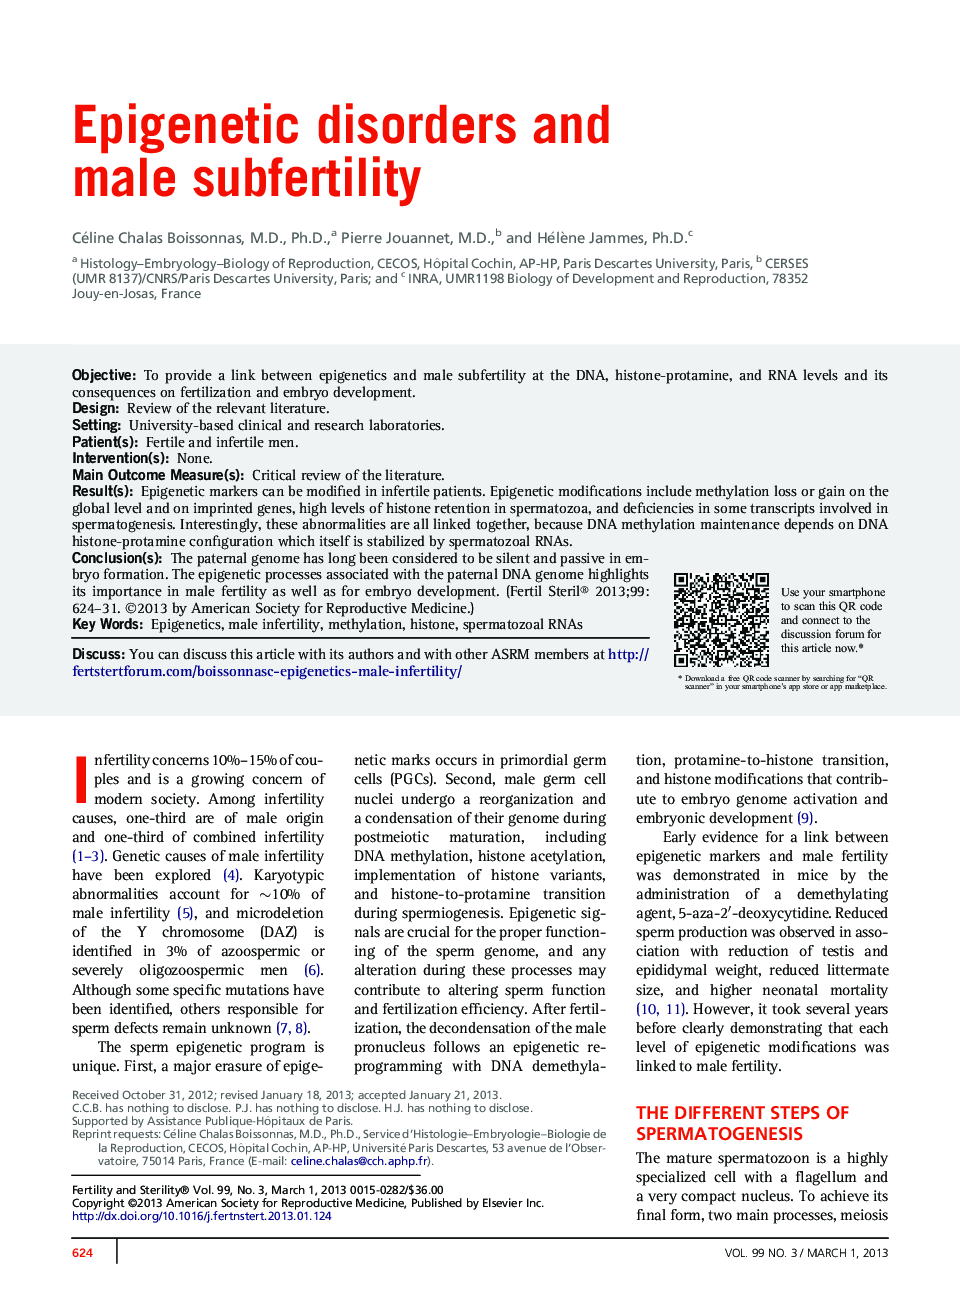 Epigenetic disorders and male subfertility 